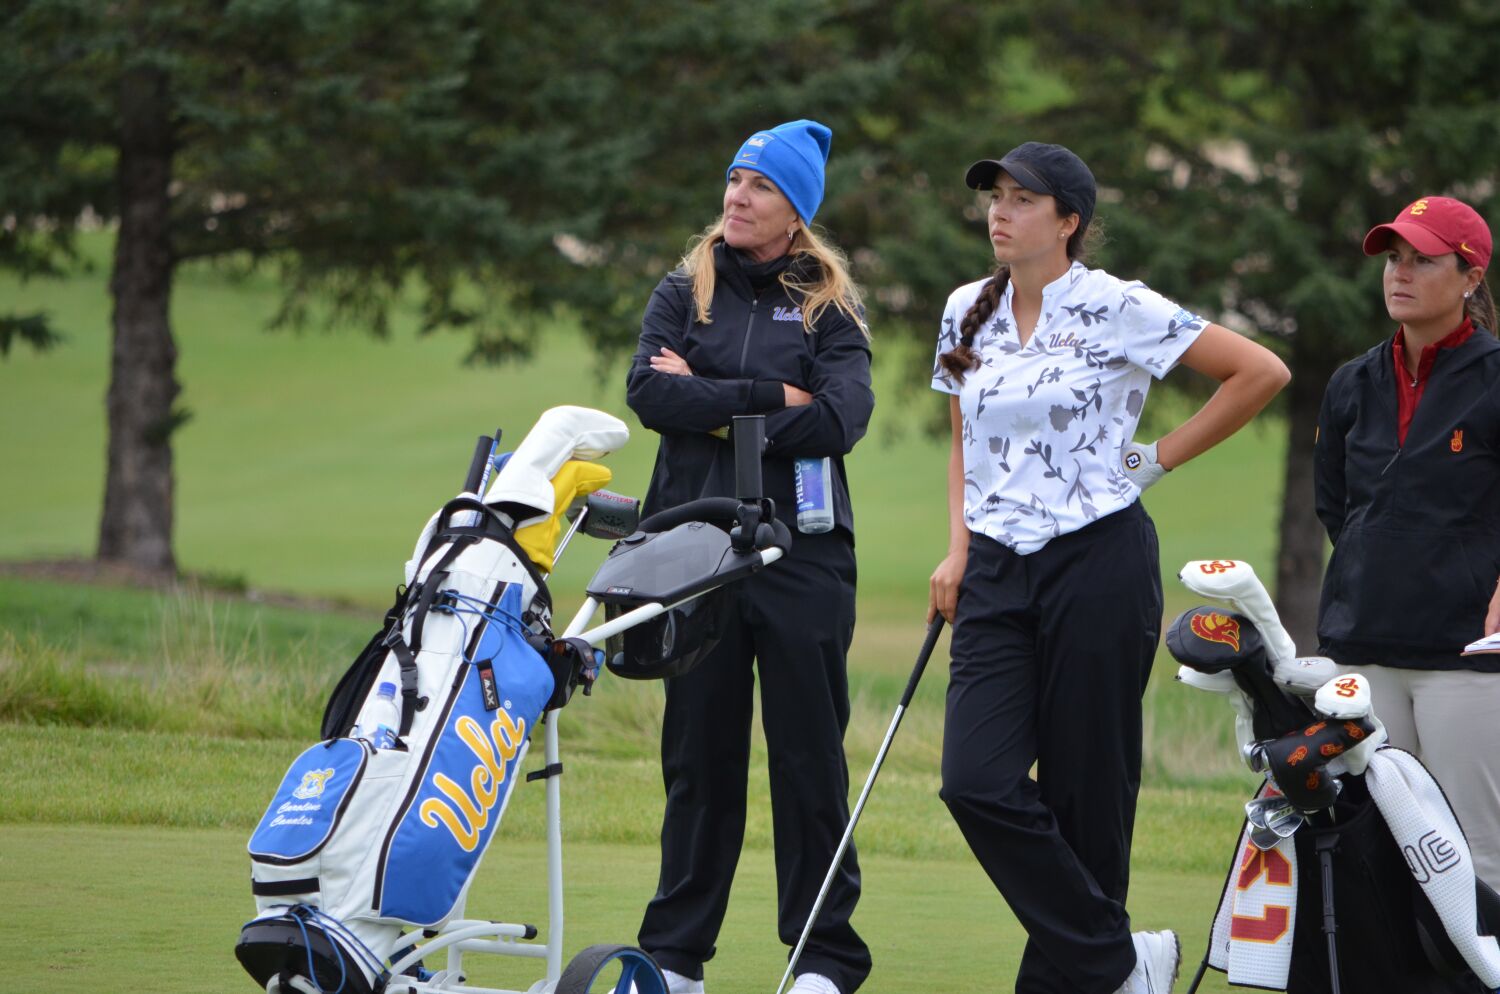 Carrie Forsyth retiring as UCLA women's golf coach after 24 years, two NCAA titles